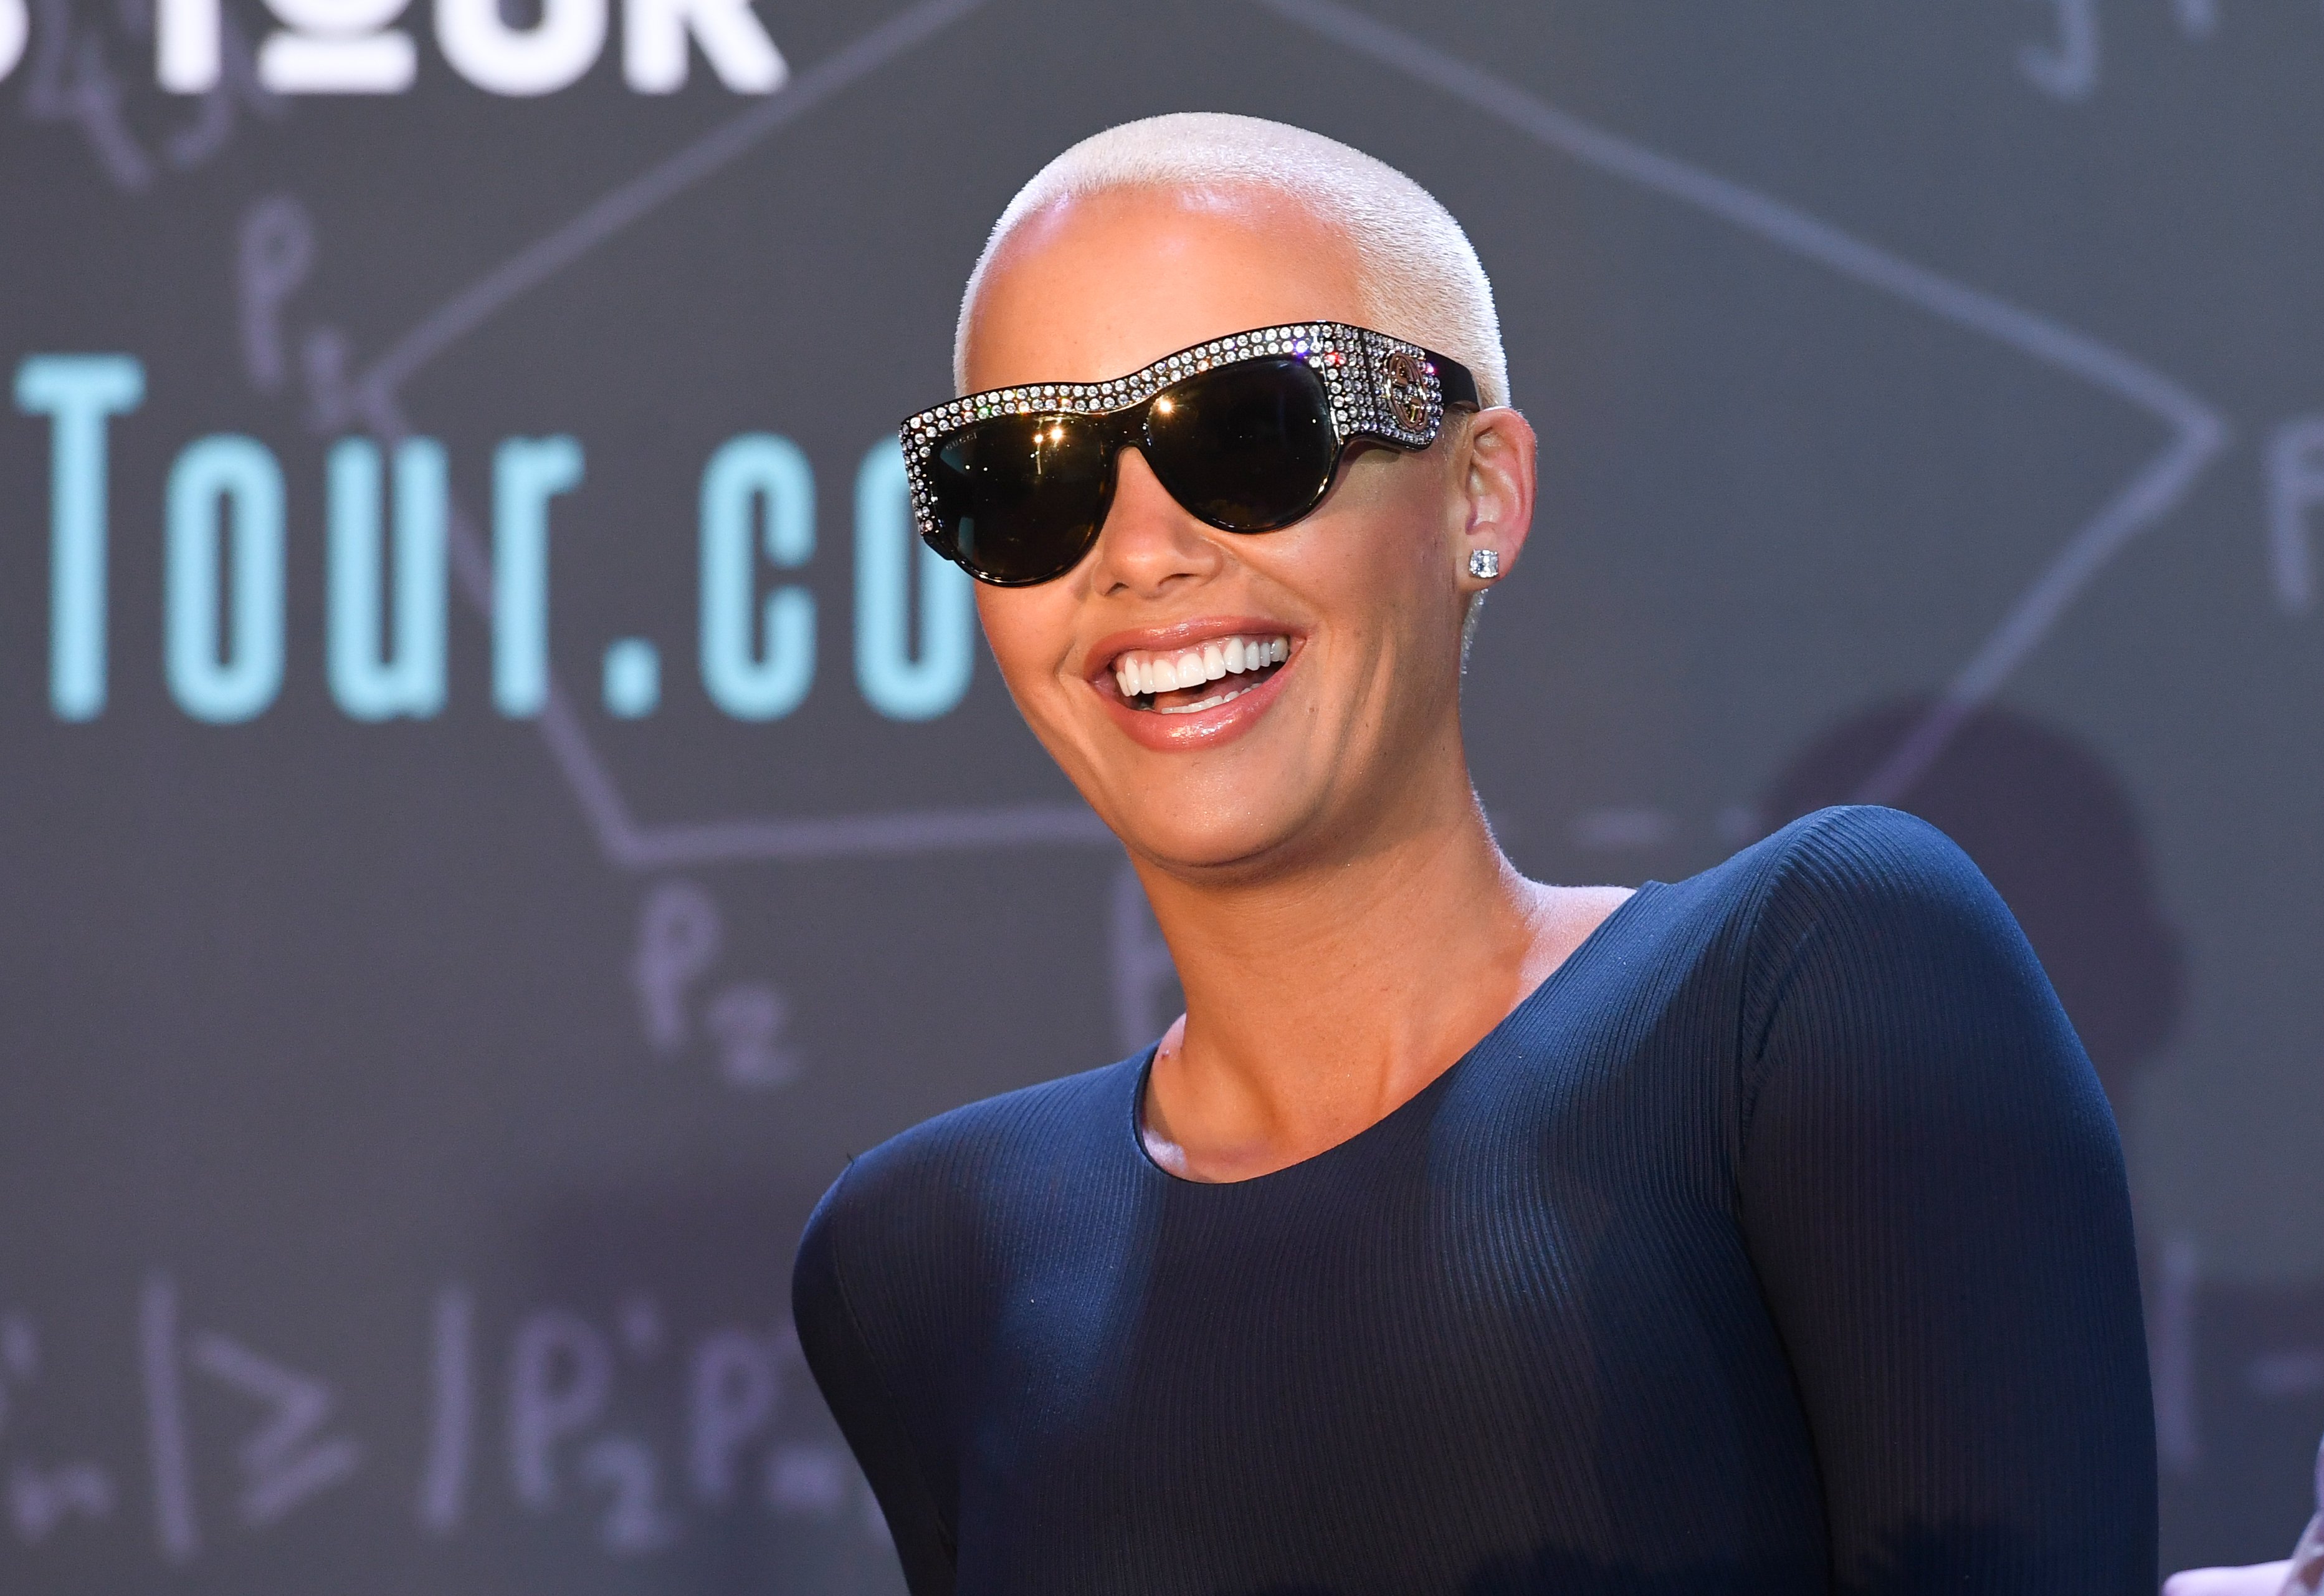  Amber Rose during an appearance at Clark Atlanta University on April 20, 2017 in Atlanta, Georgia. | Source: Getty Images